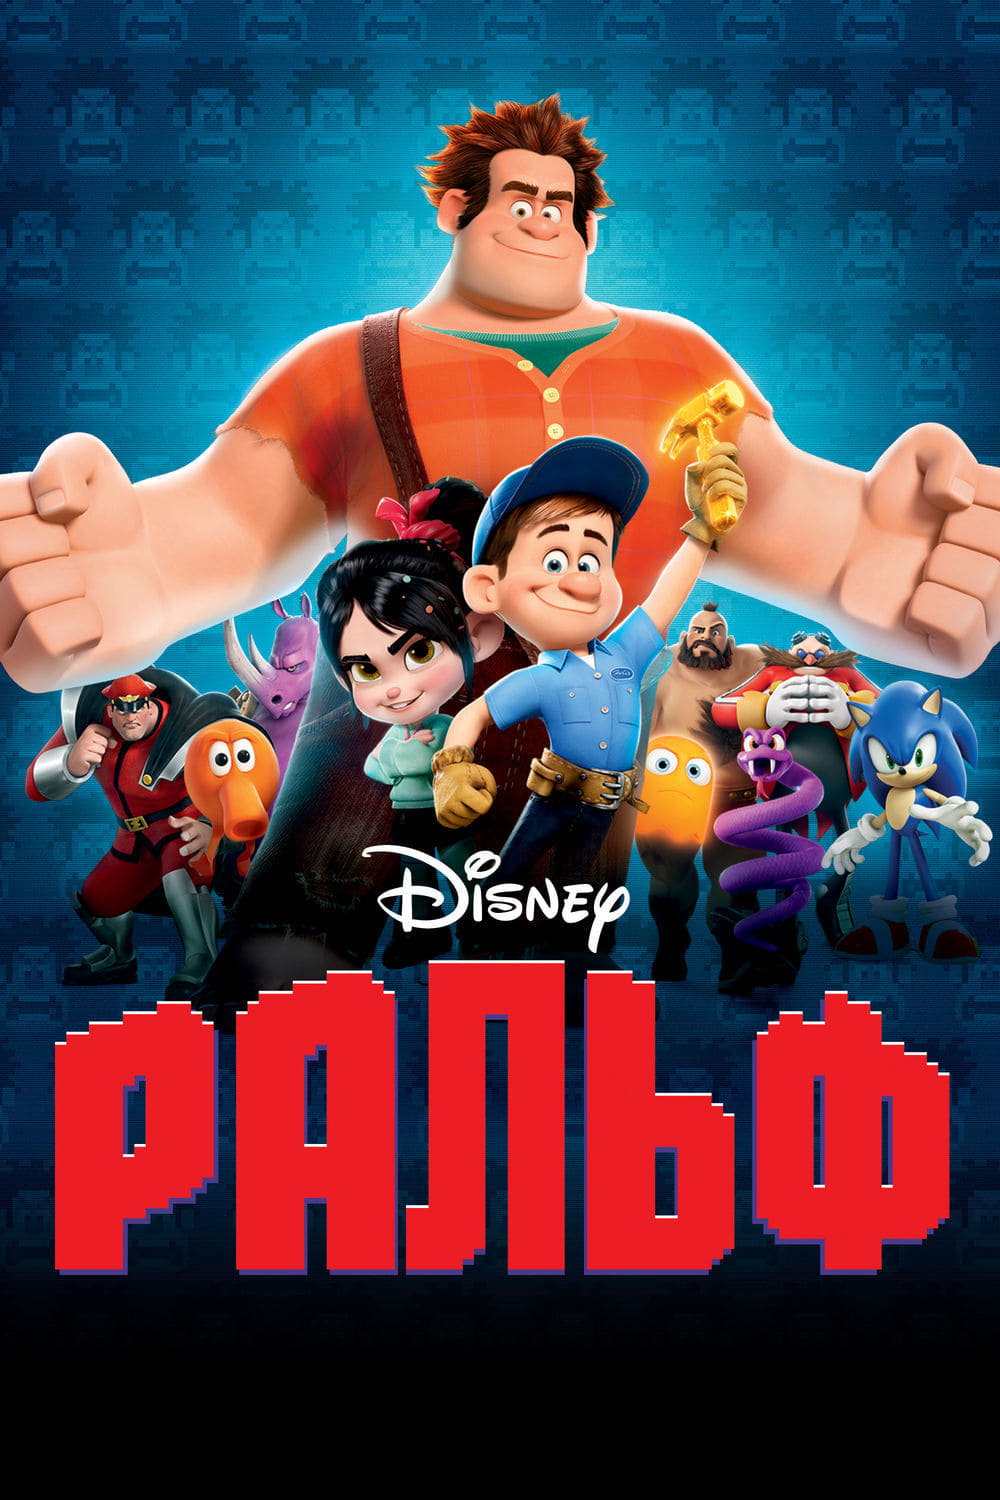 wreck it ralph full movie download mp4